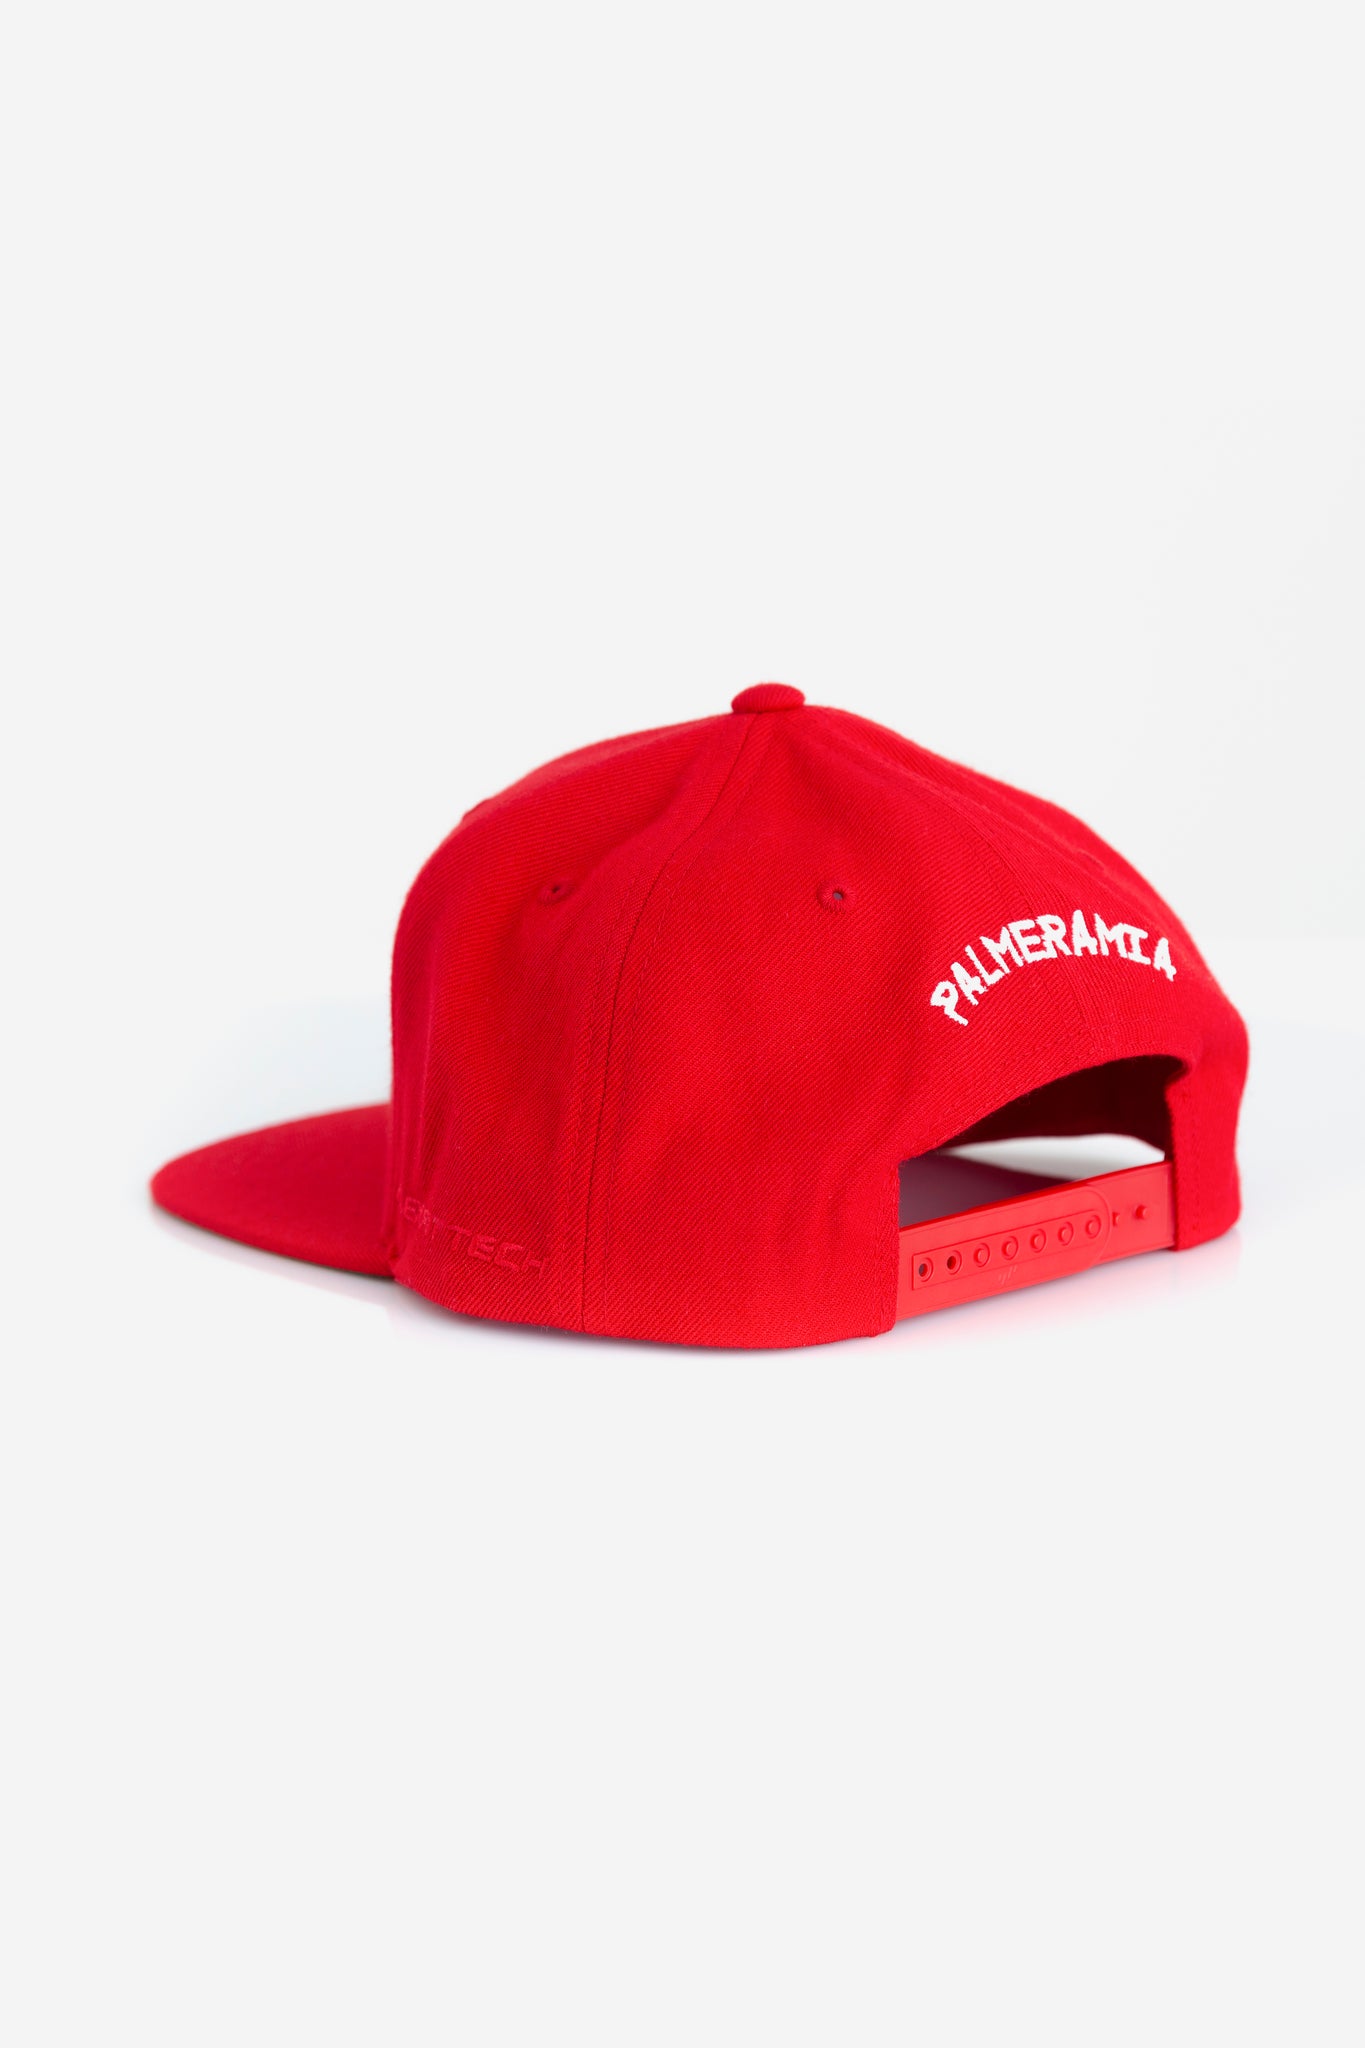 RED CLASSIC SNAPBACK